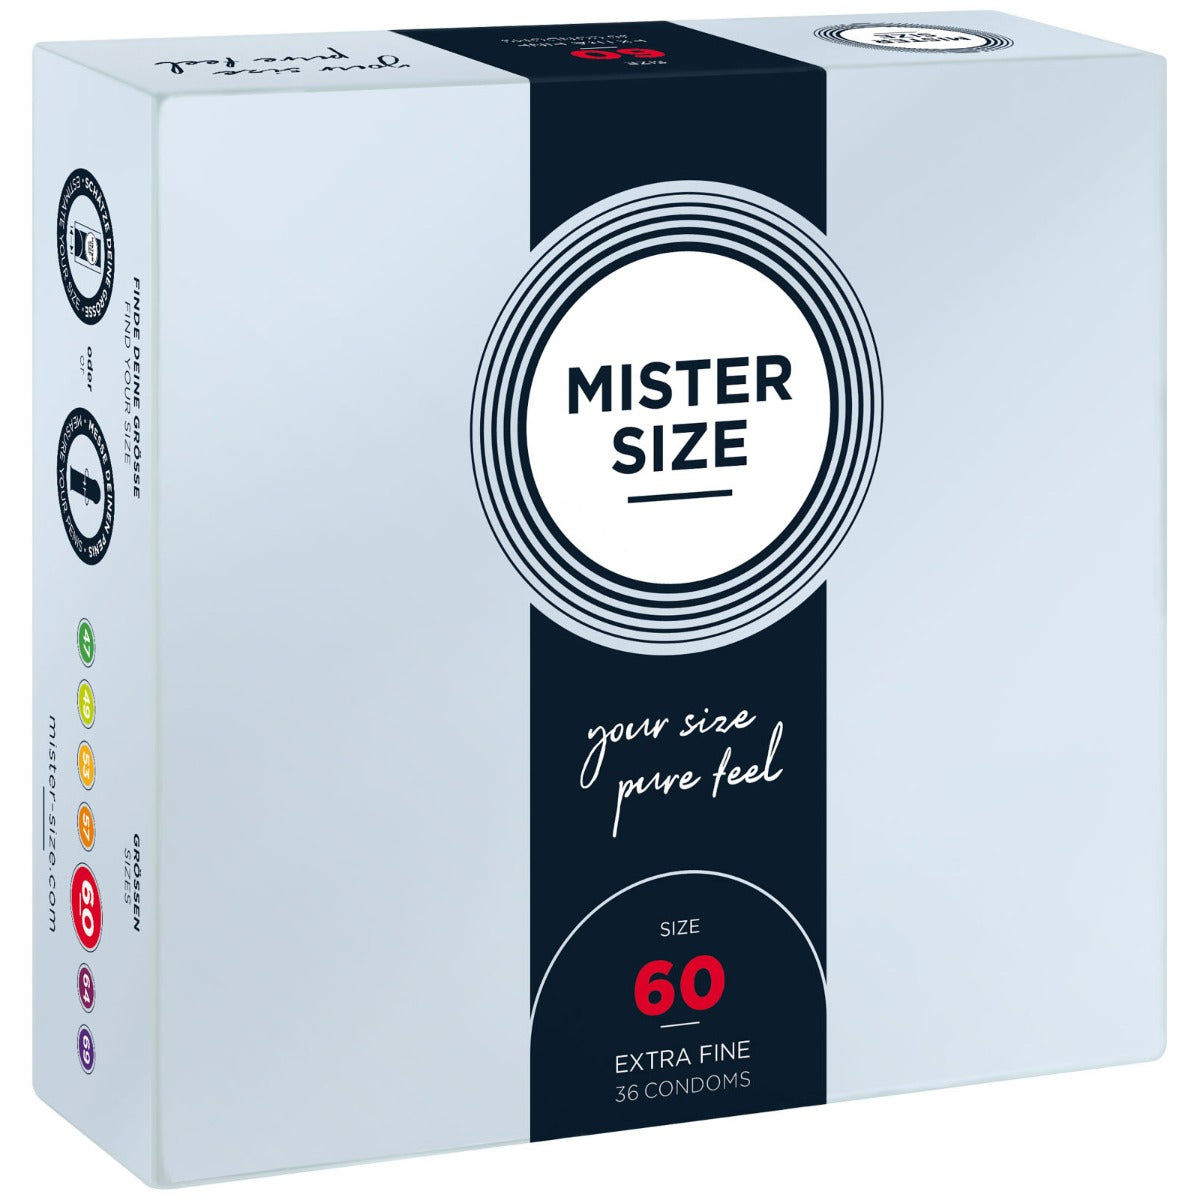 Mister Size Pure Feel Condoms 60mm (8085941747951)